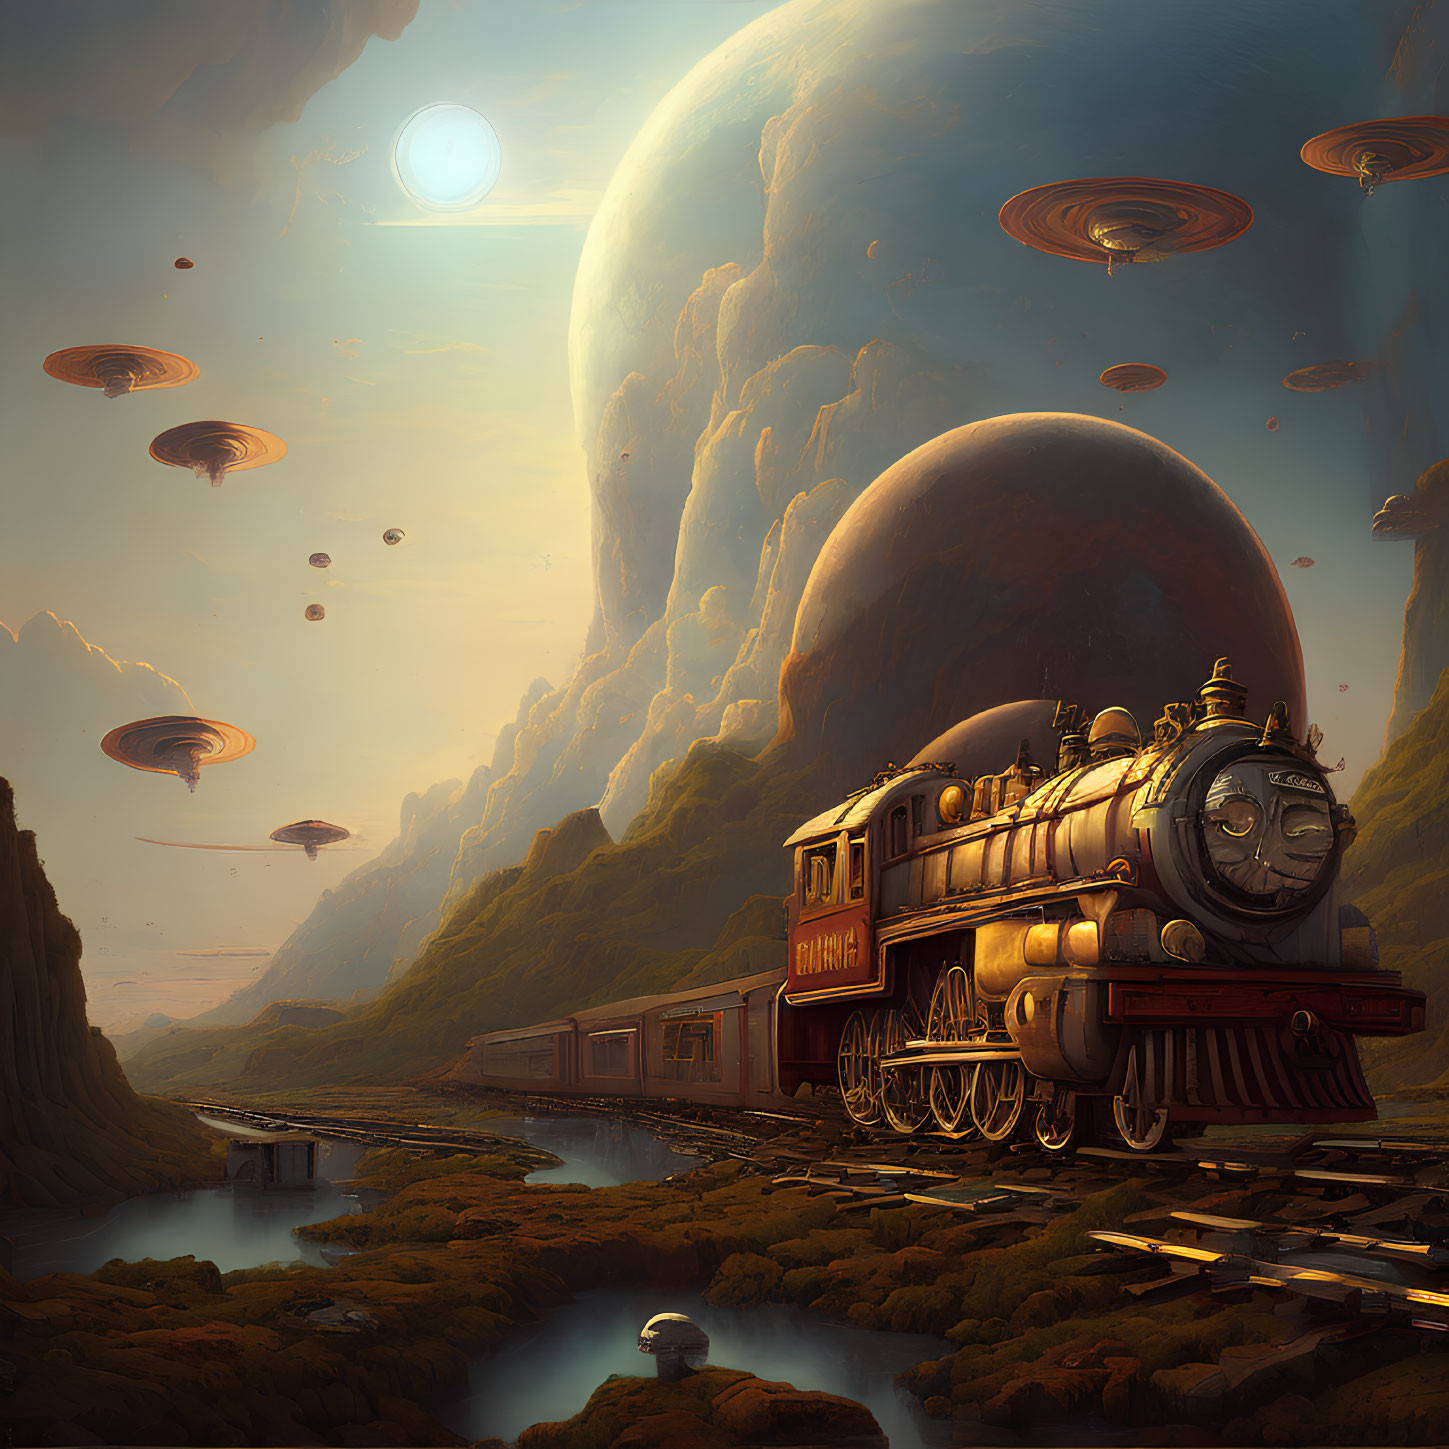 Vintage train crossing bridge in lush valley under huge planet with flying saucers.